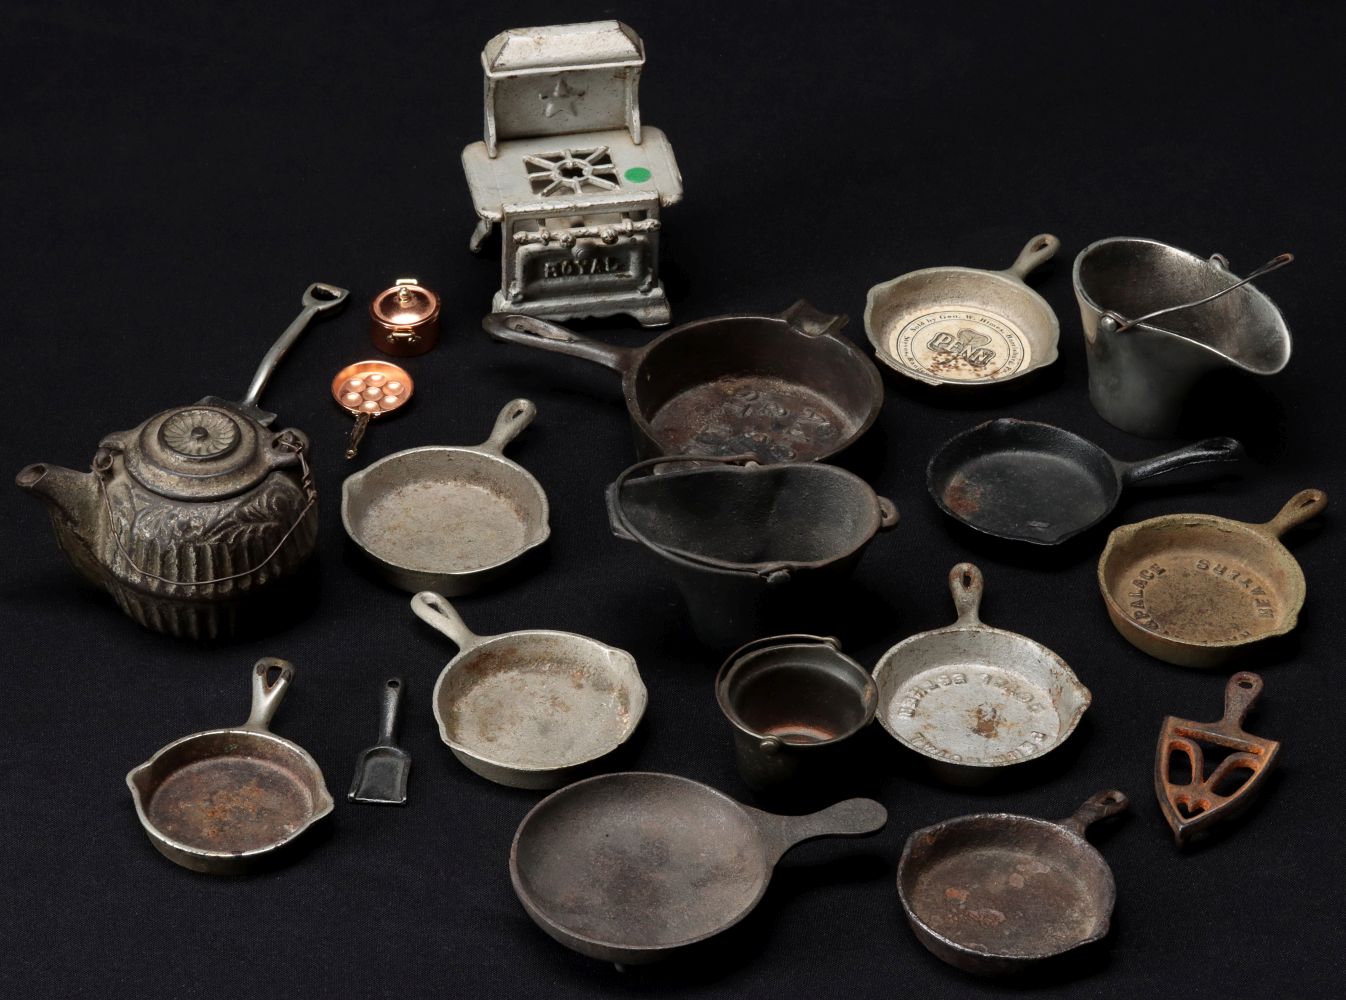 A LARGE COLLECTION OF ANTIQUE MINIATURE IRON COOKWARE